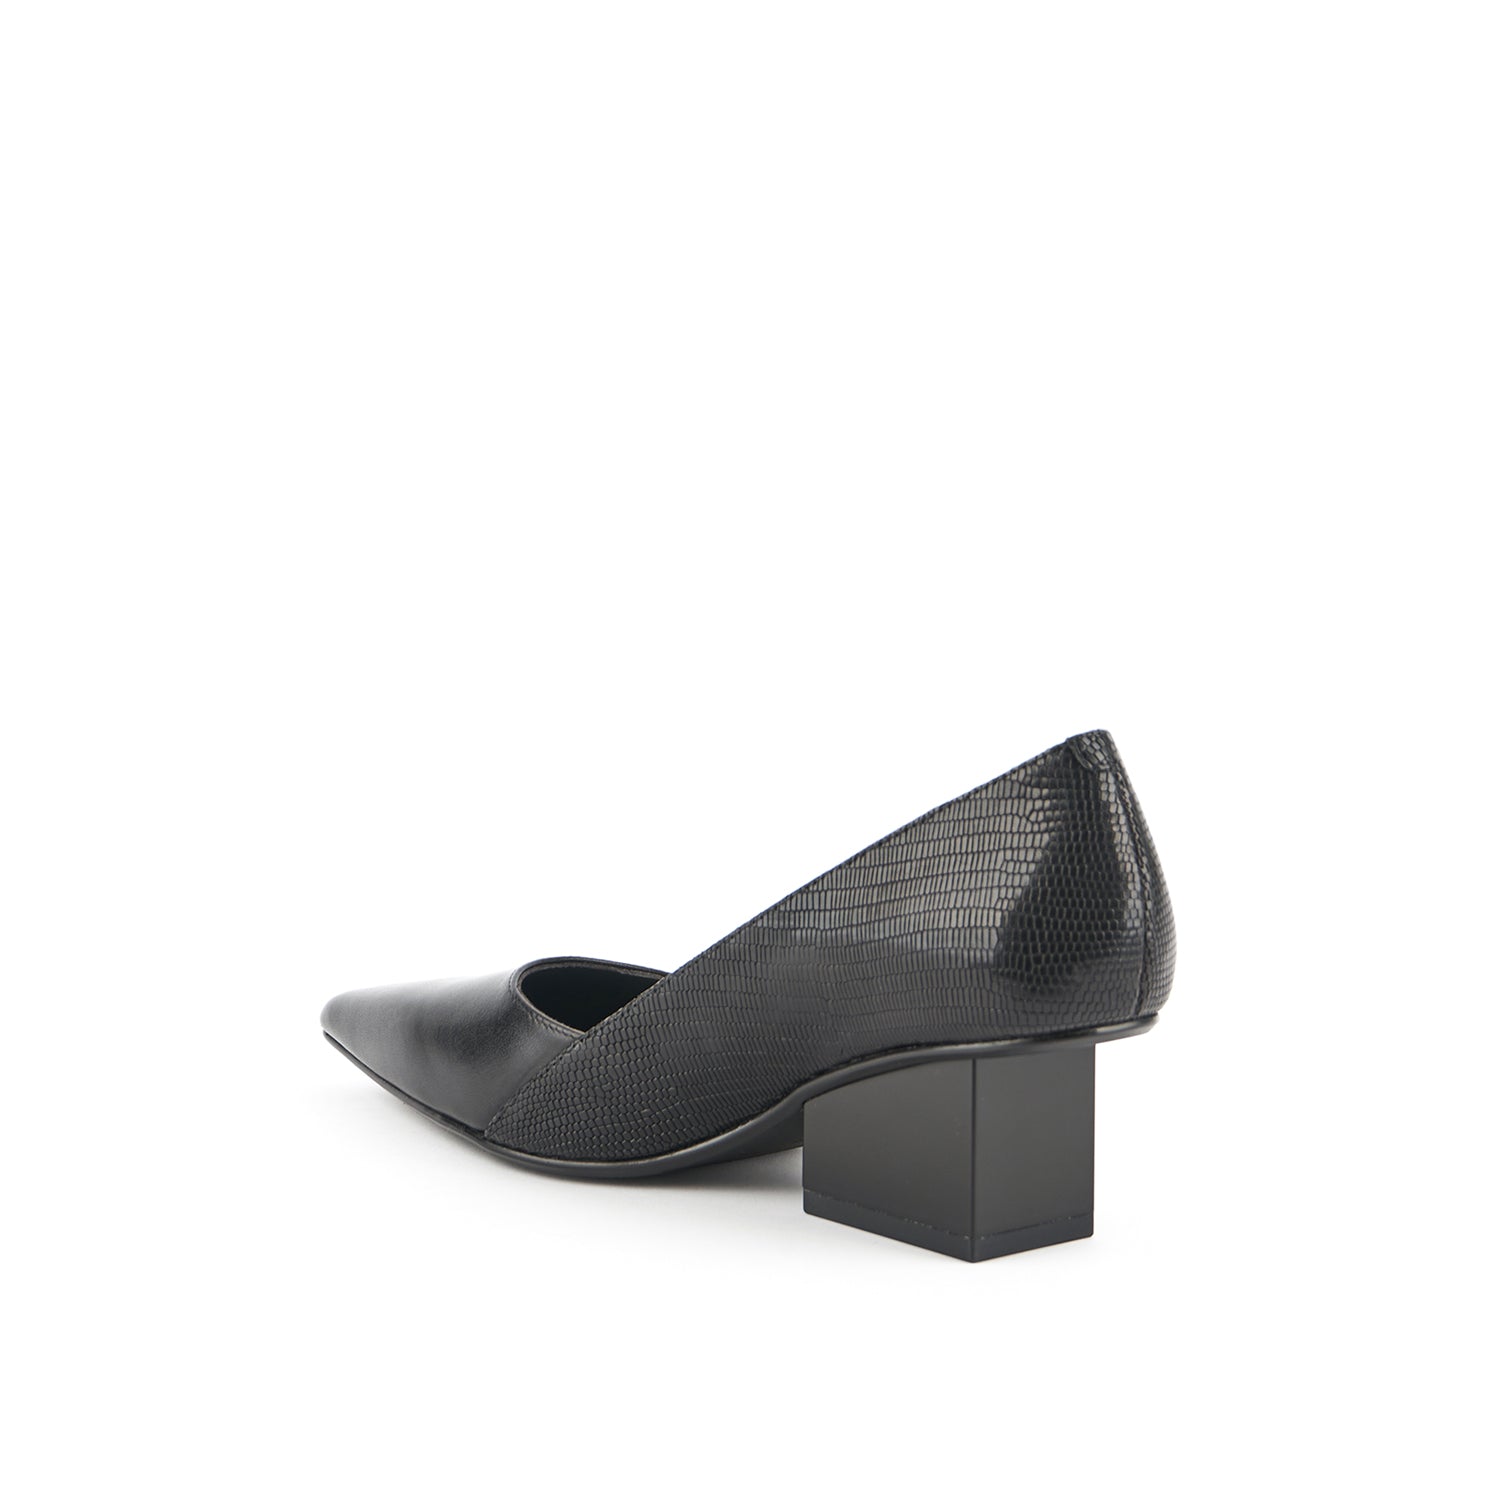 Inner back side view of the united nude raila pump in black.